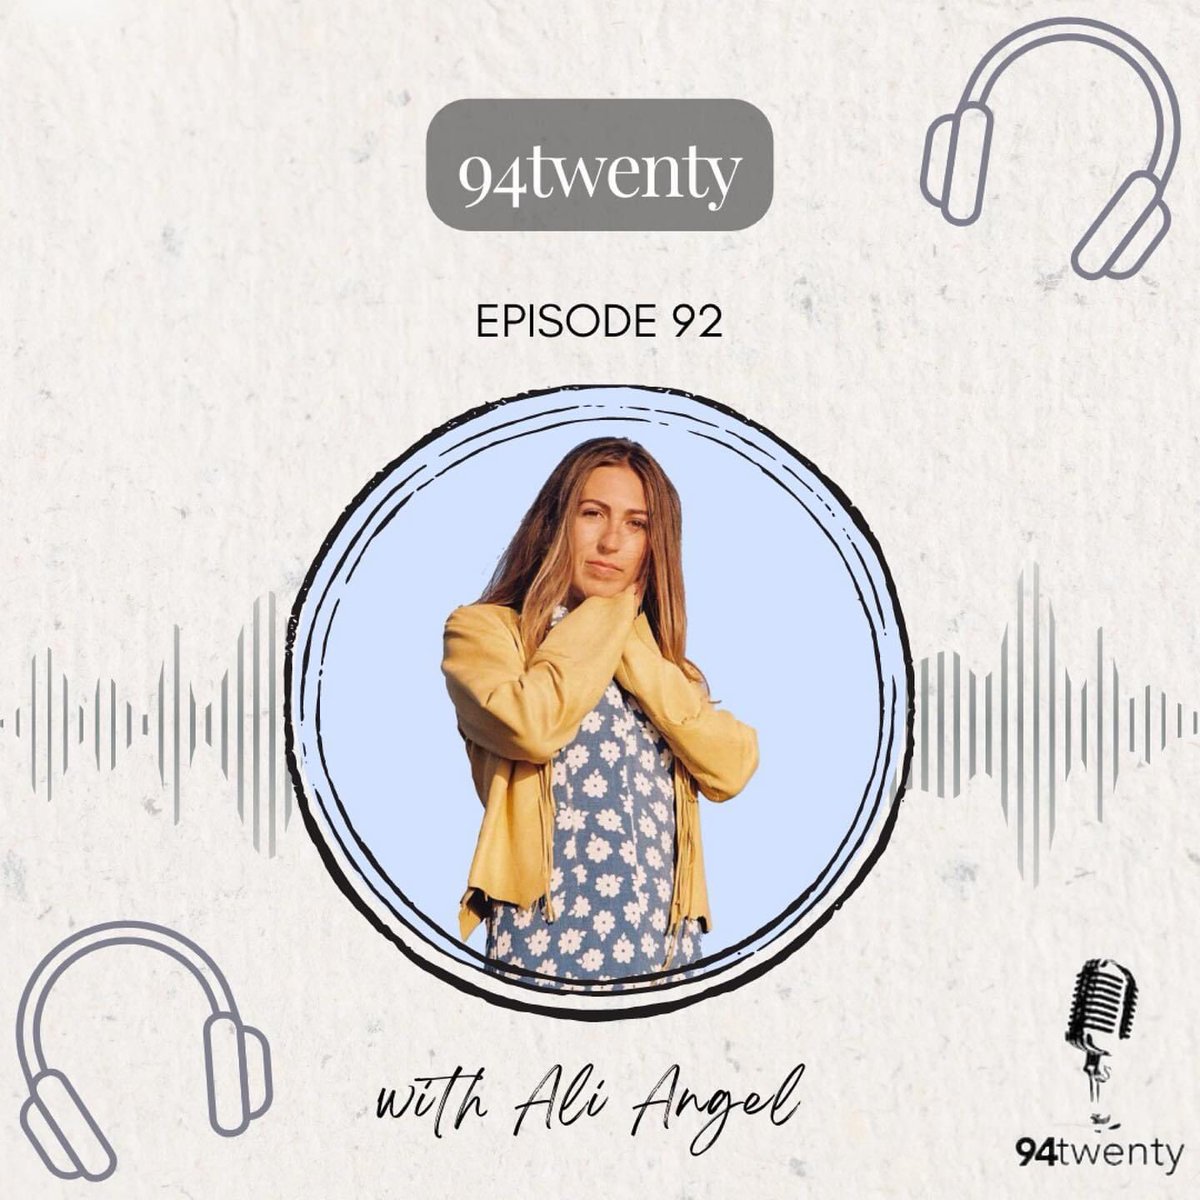 'I'm just a girl, standing in front of a playlist, asking it to have @aliangelmusic on it. 

Who knew classic rock bands knew how TikTok worked??? 

94twenty.com/2022/06/02/94t…

#musicdiscovery #musicindustry #podcast #podcastlistening #indiemusic #nashvillemusic #newmusicalert